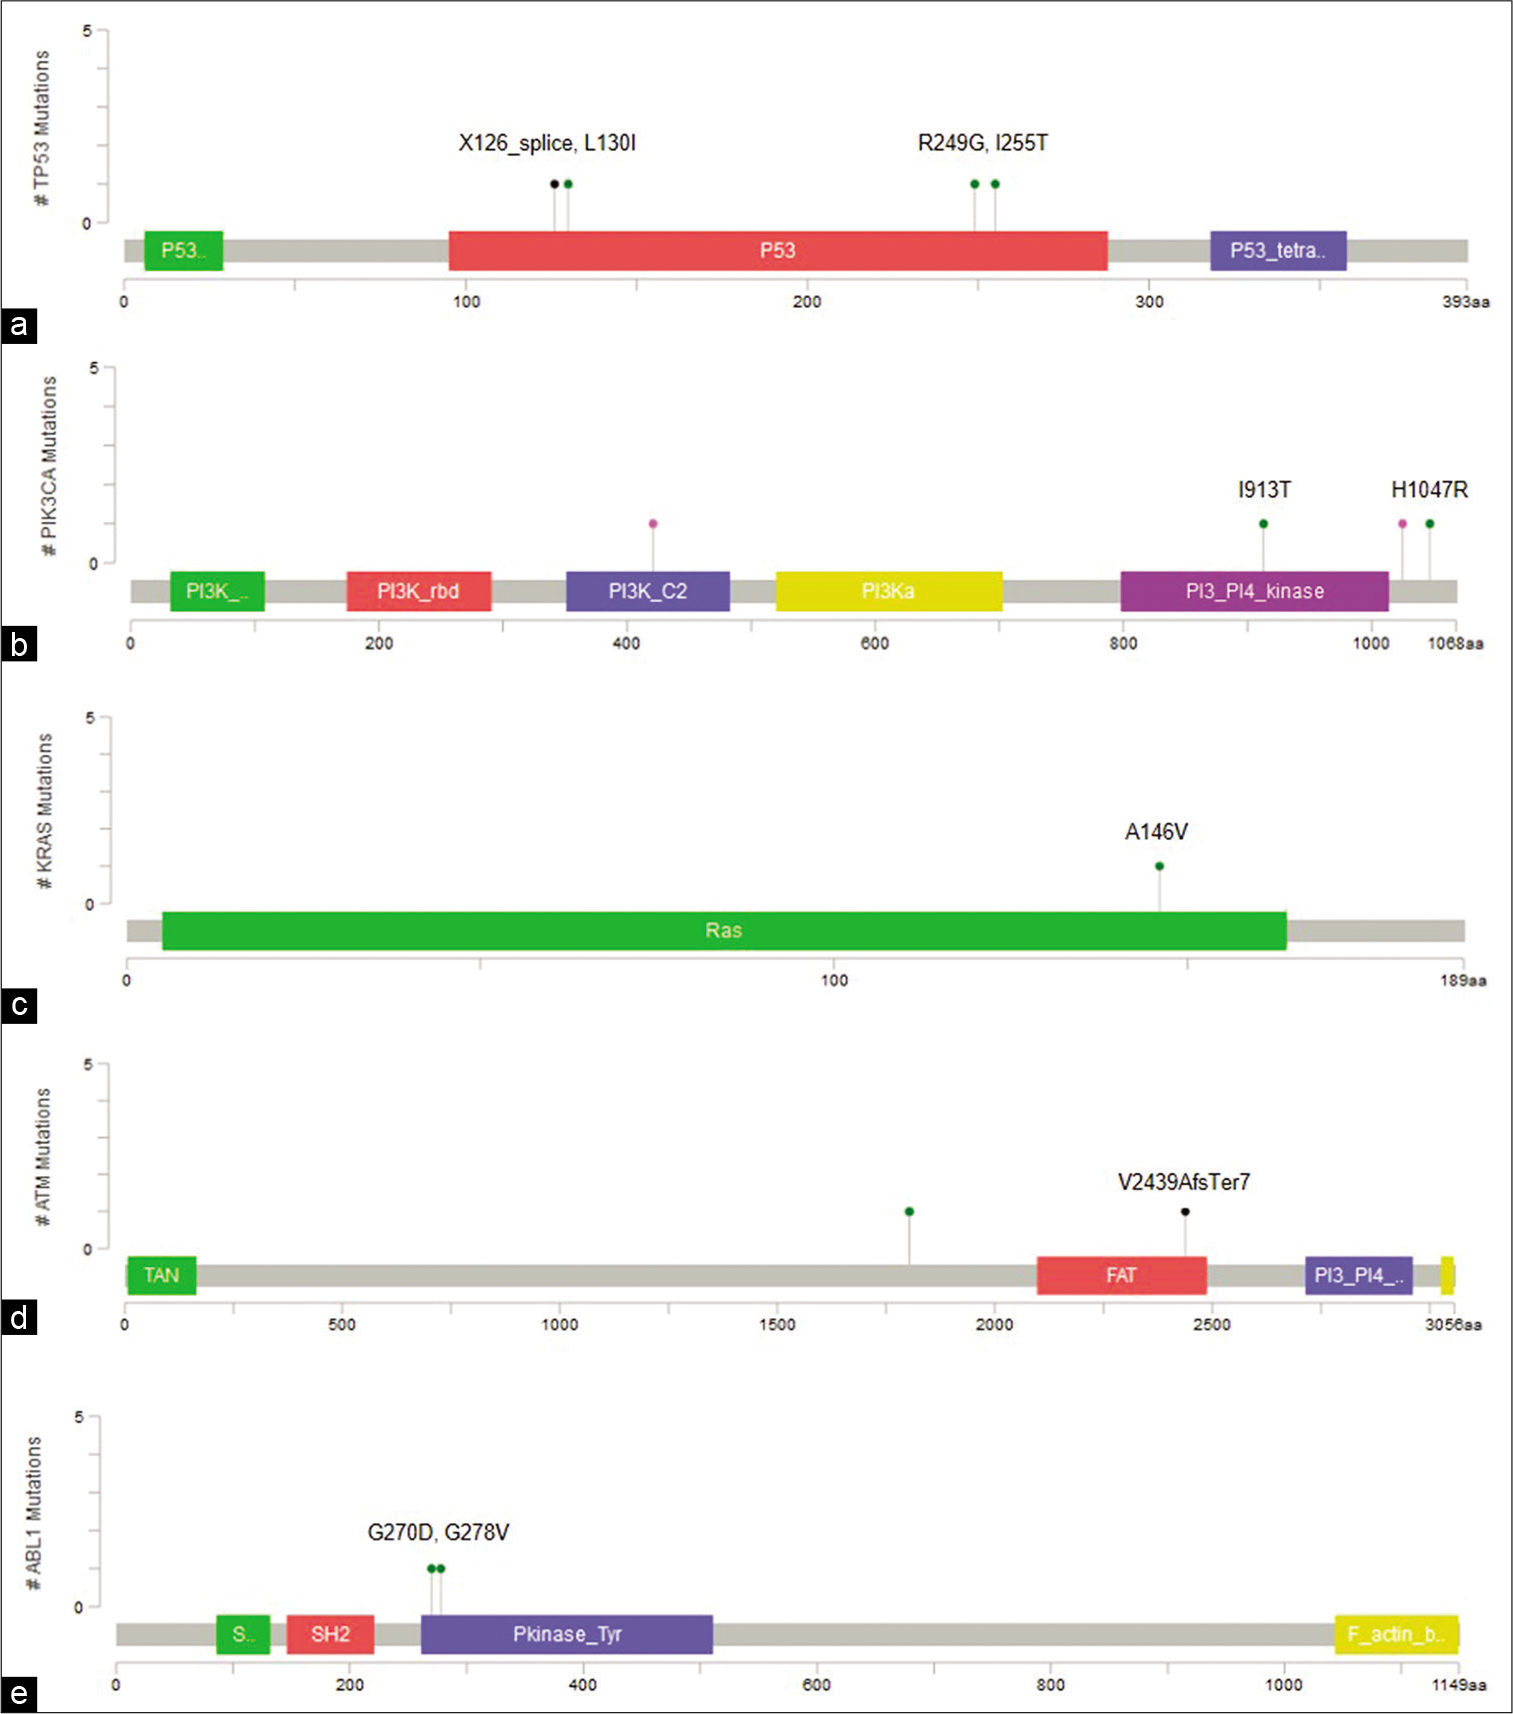 Visualization of variants in protein coding regions of genes using MutationMapper. (a) TP53 (p.X126_splice, p.L130I,p.R249G, p.I255T), (b) PIK3CA (p.I913T, p.H1047R), (c) KRAS (p.A146V), (d) ATM (p.V2439AfsTer7), (e) ABL1 (p.G270D, p.G278V).